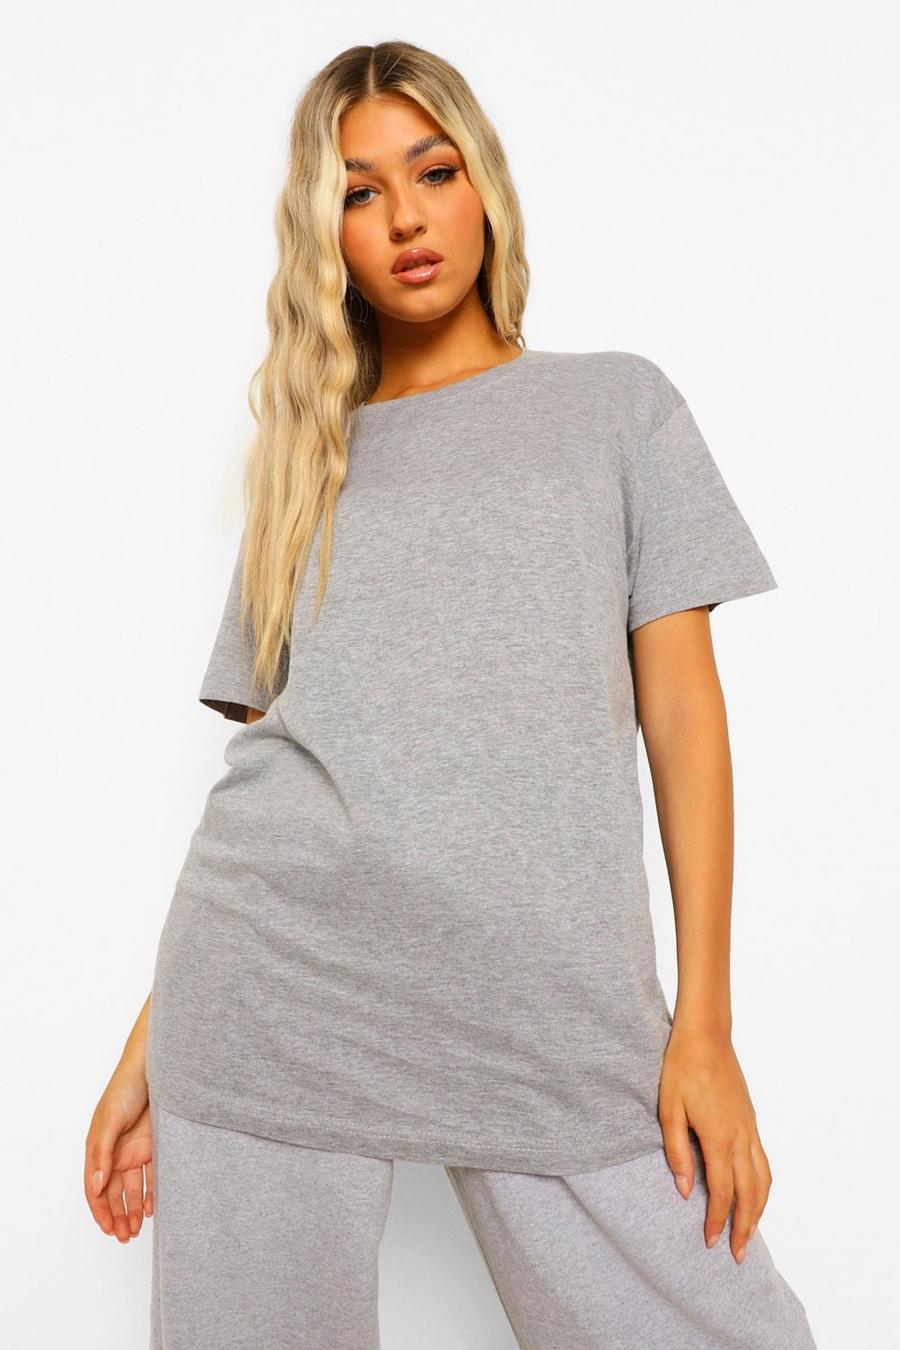 Charcoal Tall Basic Plain Cotton T-Shirt image number 1